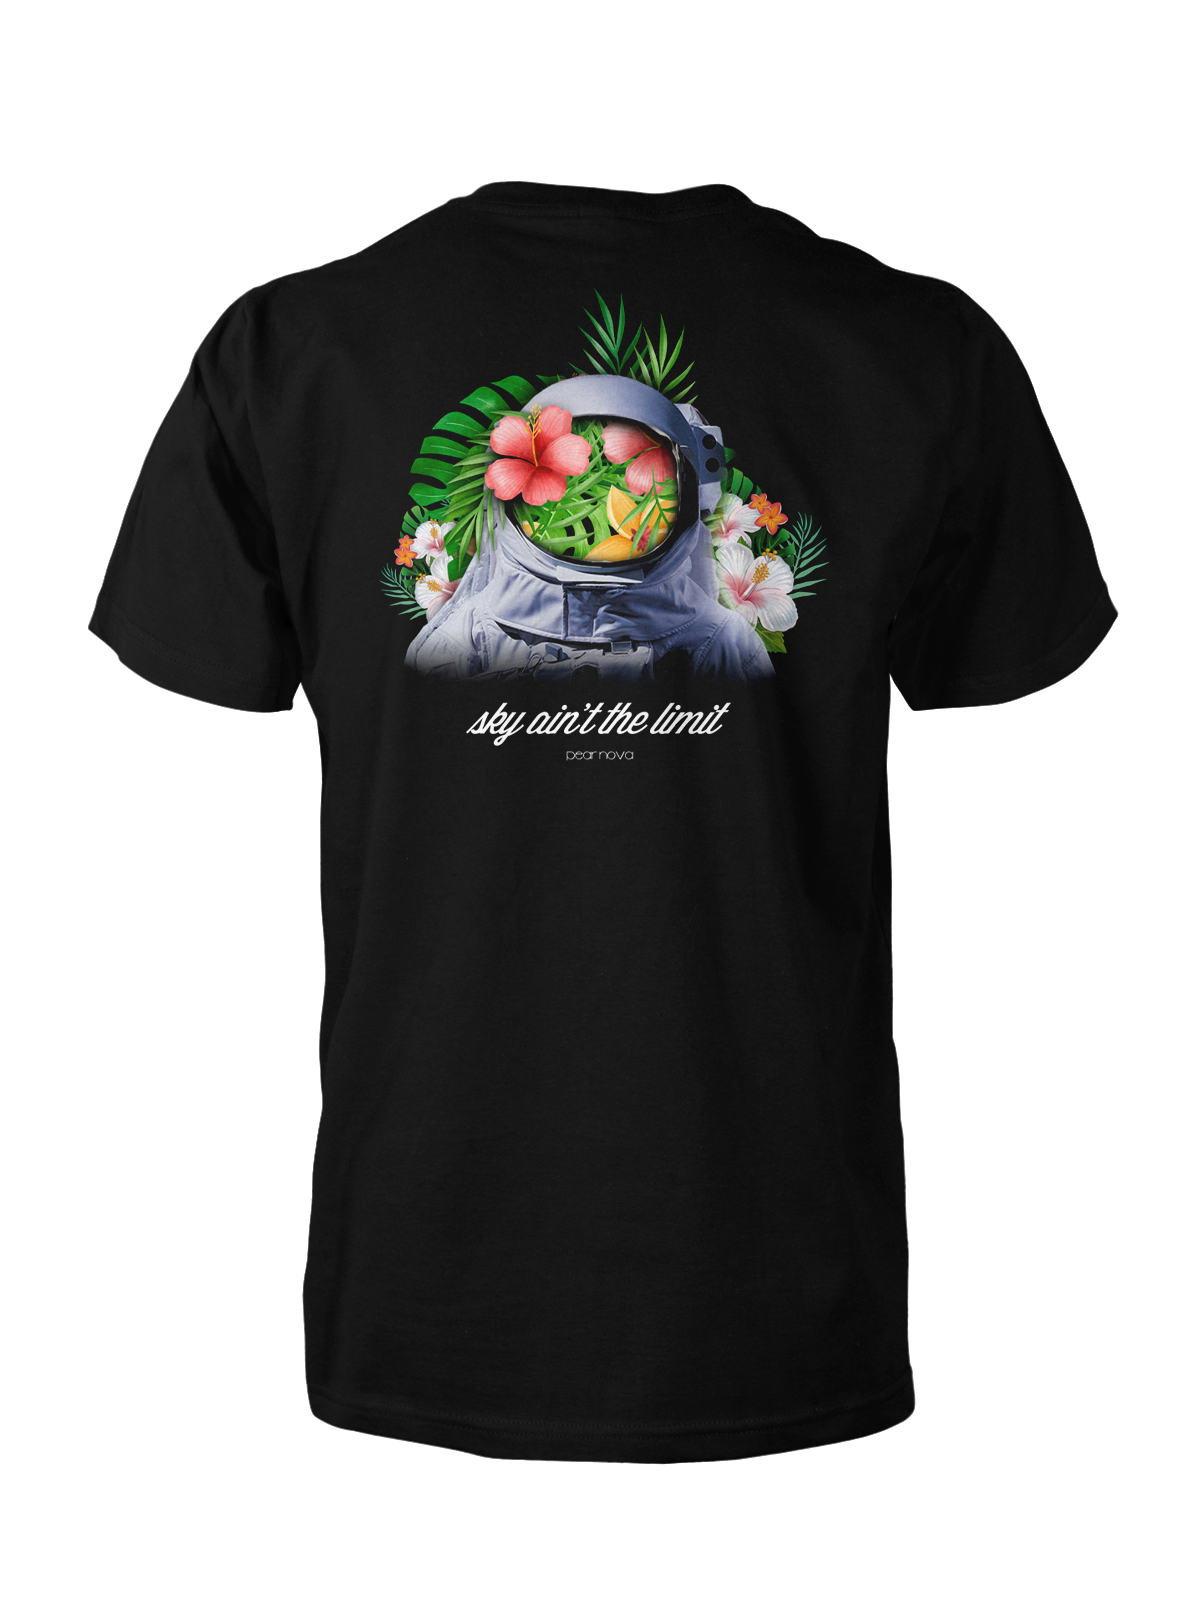 back of black t-shirt with a astronaut and flowers with the words "sky aint the limit"